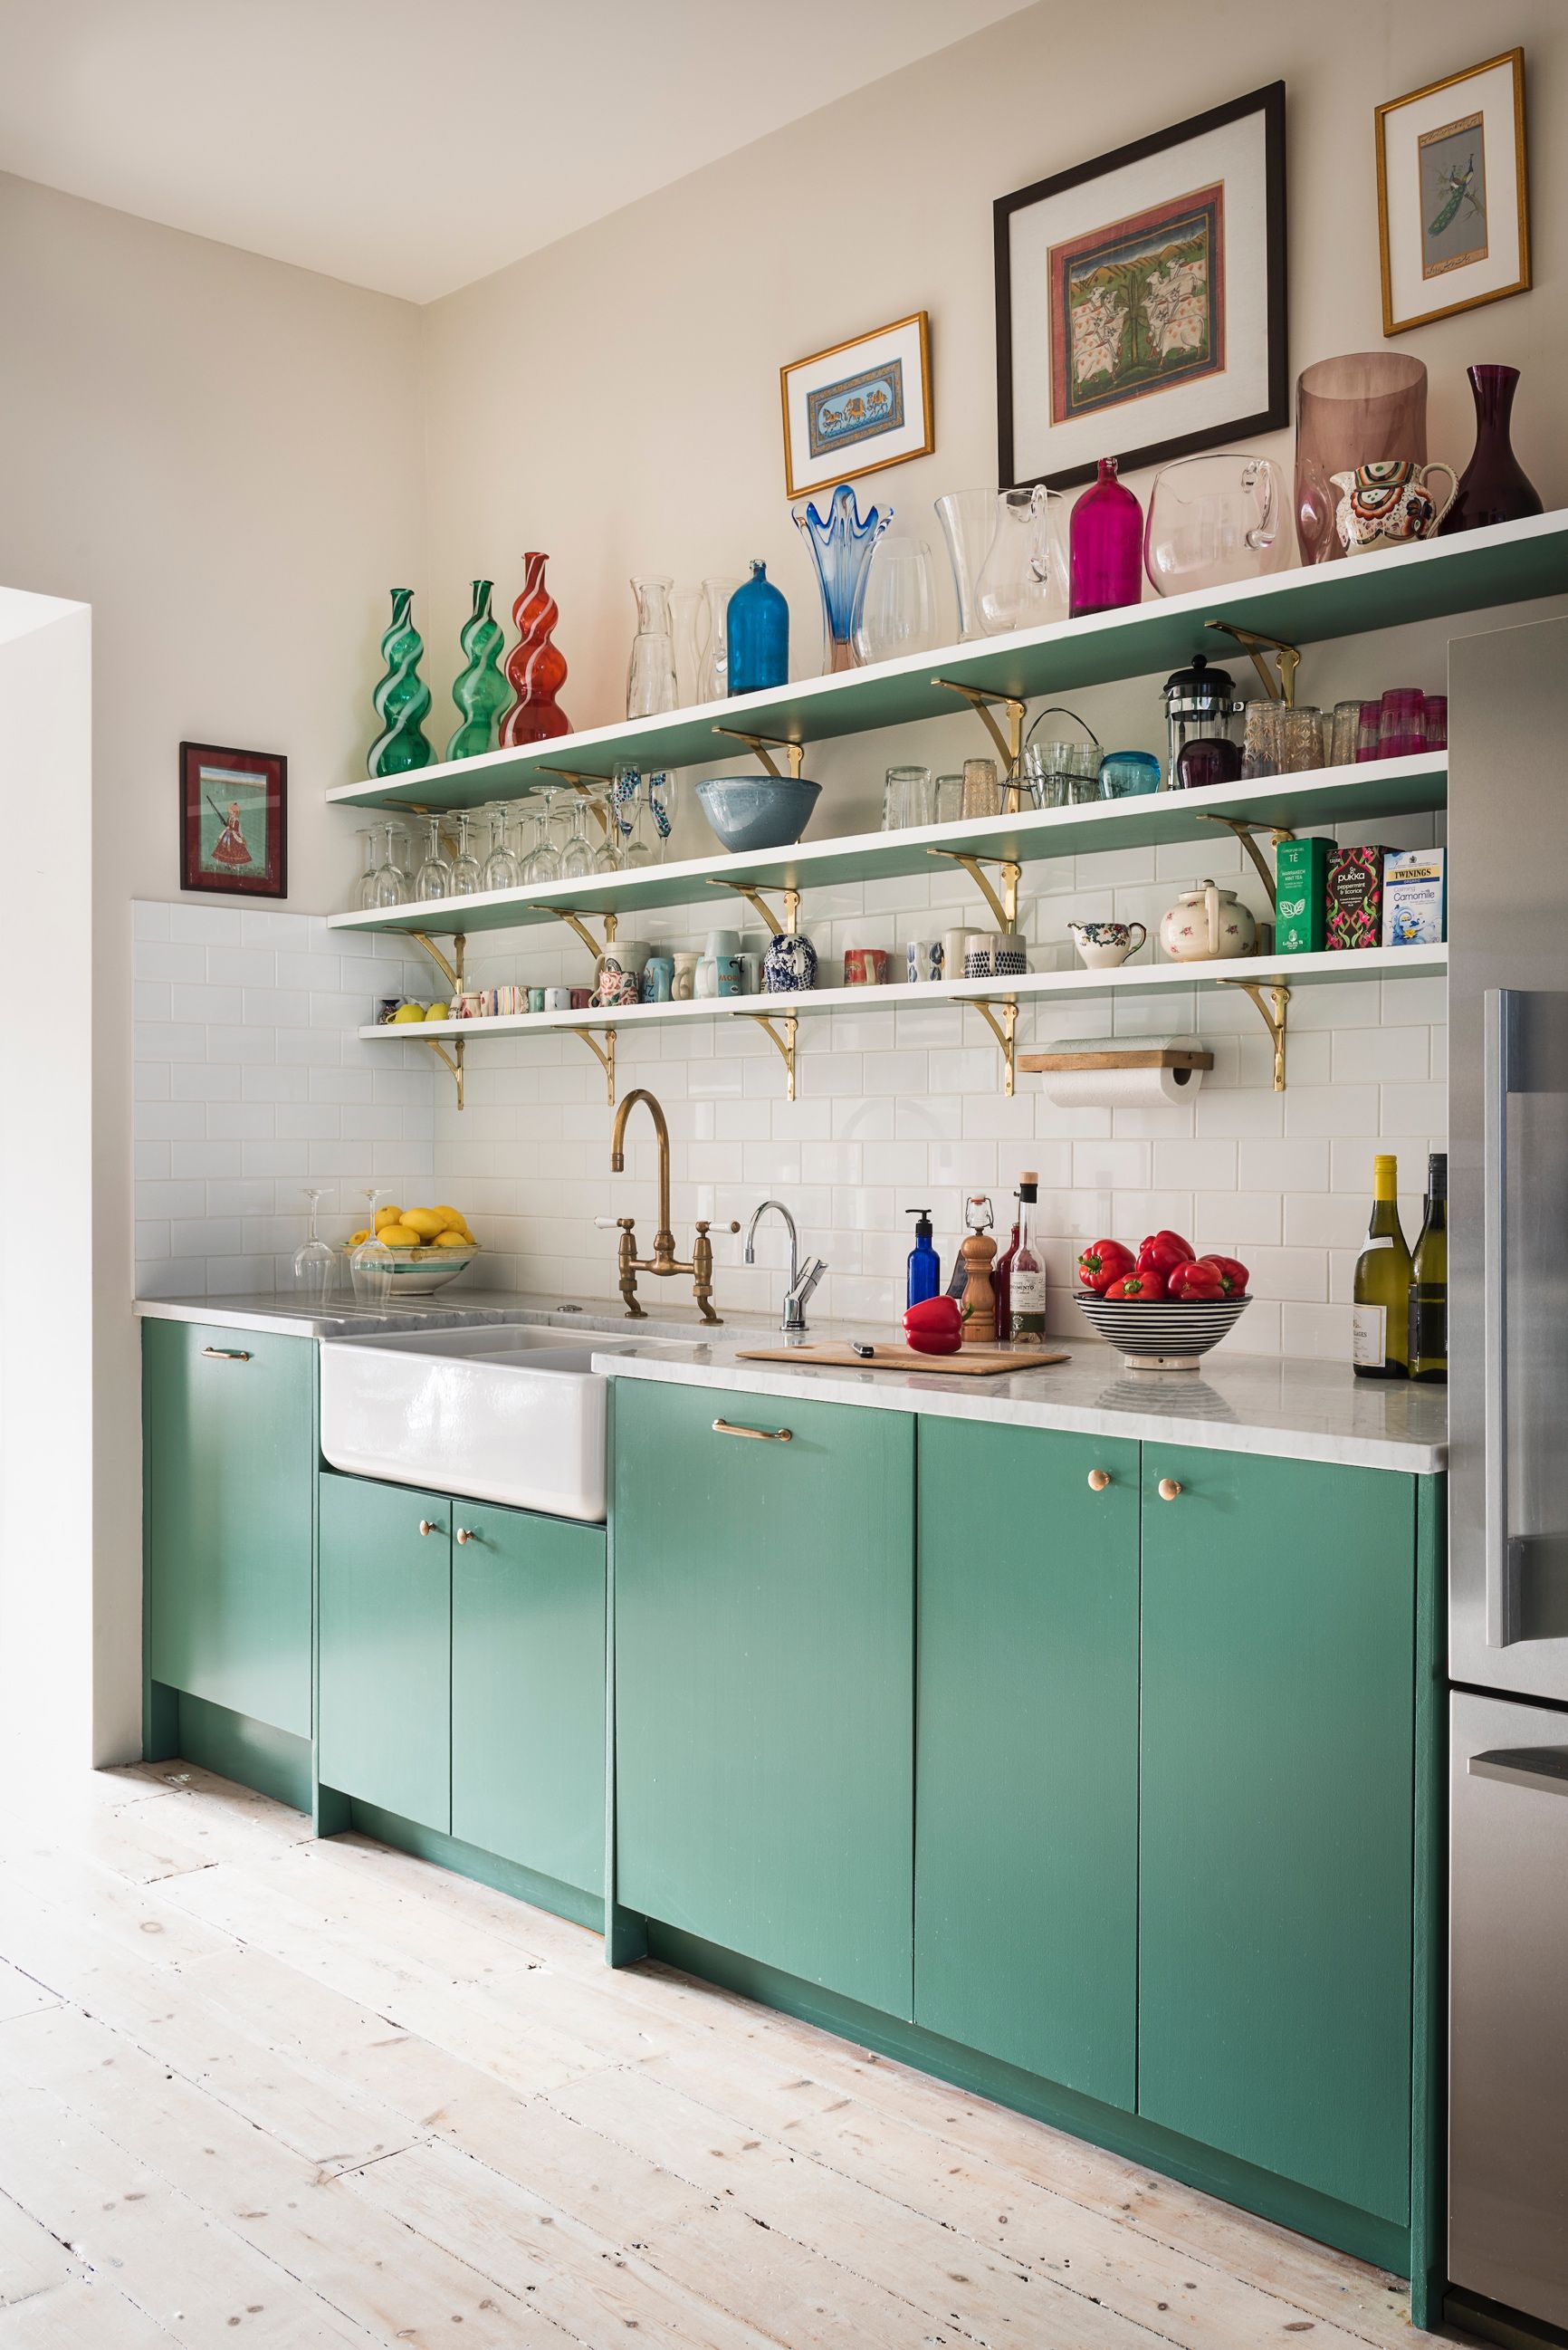 8 of the most calming colors for a small kitchen | Livingetc